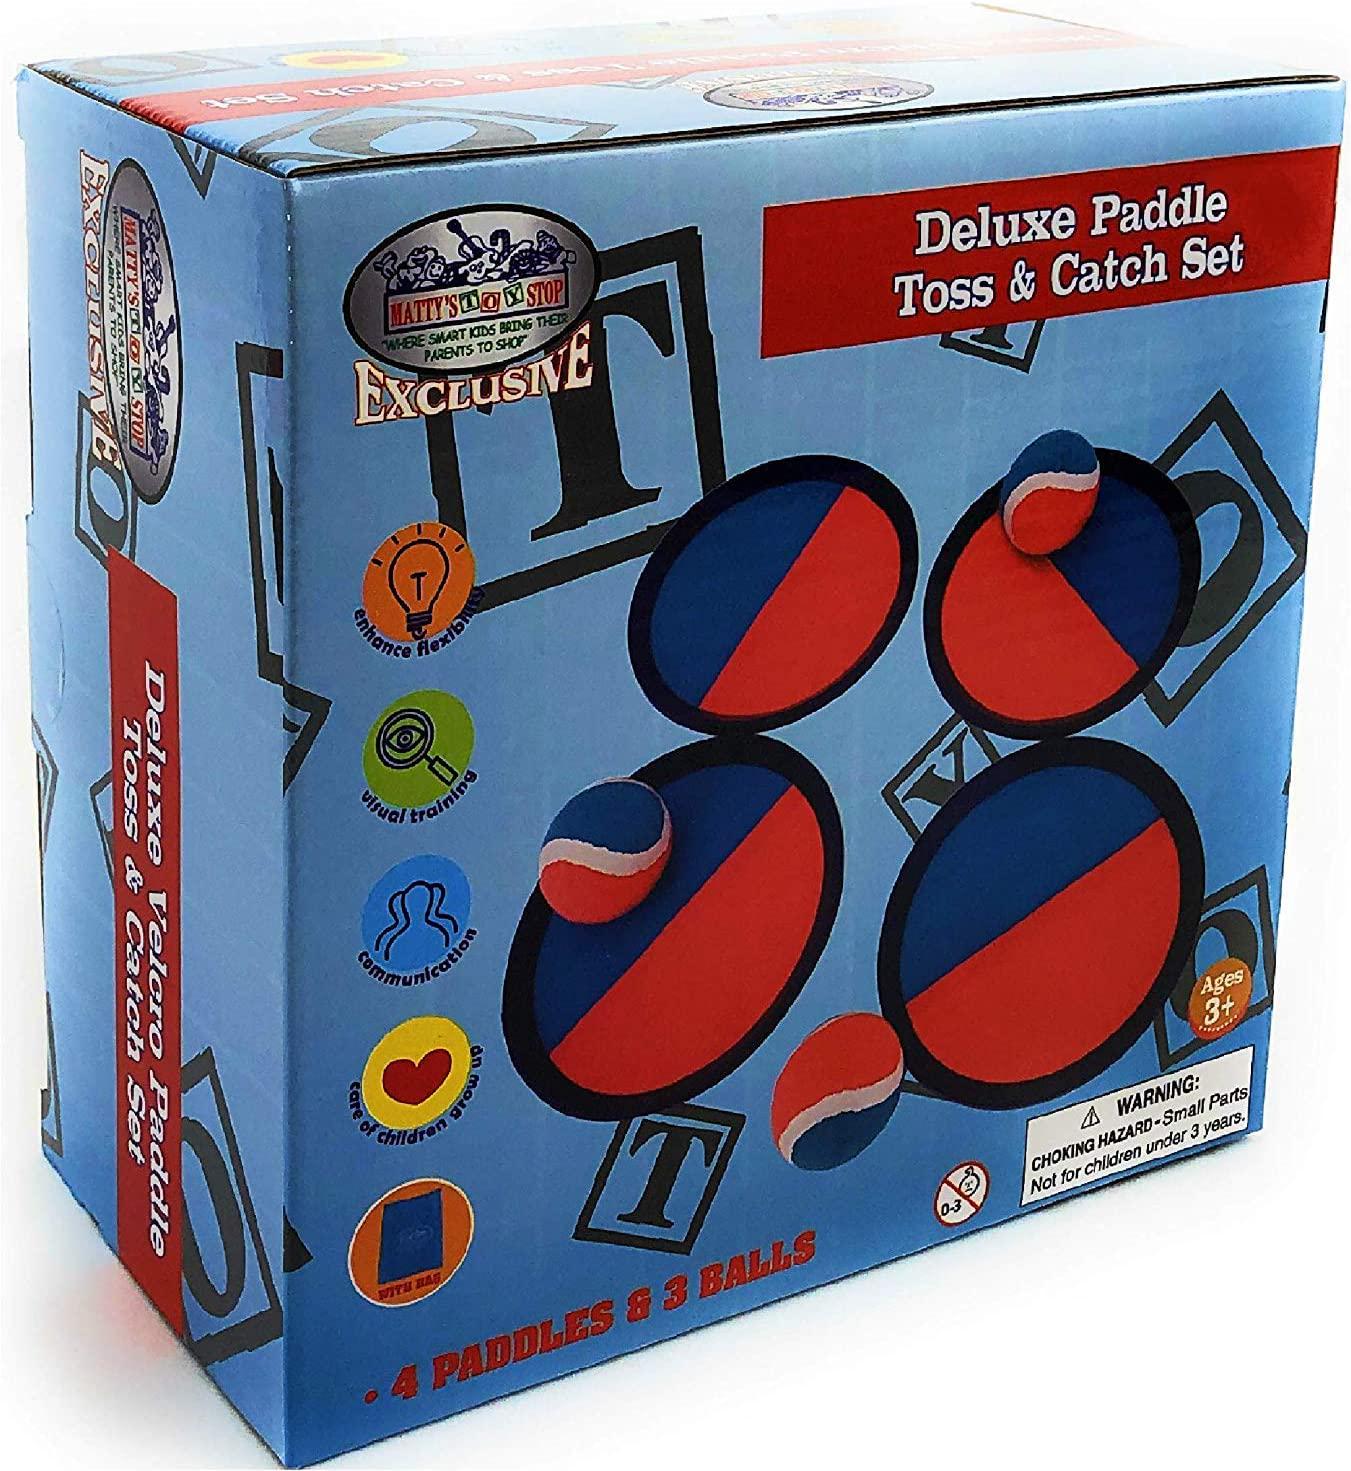 Matty's Toy Stop, Matty's Toy Stop Deluxe Toss and Catch (Hook and Loop) Tropical Colors Paddle Game Set with 4 Paddles, 3 Balls and Storage Bag - Perfect for The Beach, Backyard or in The House!